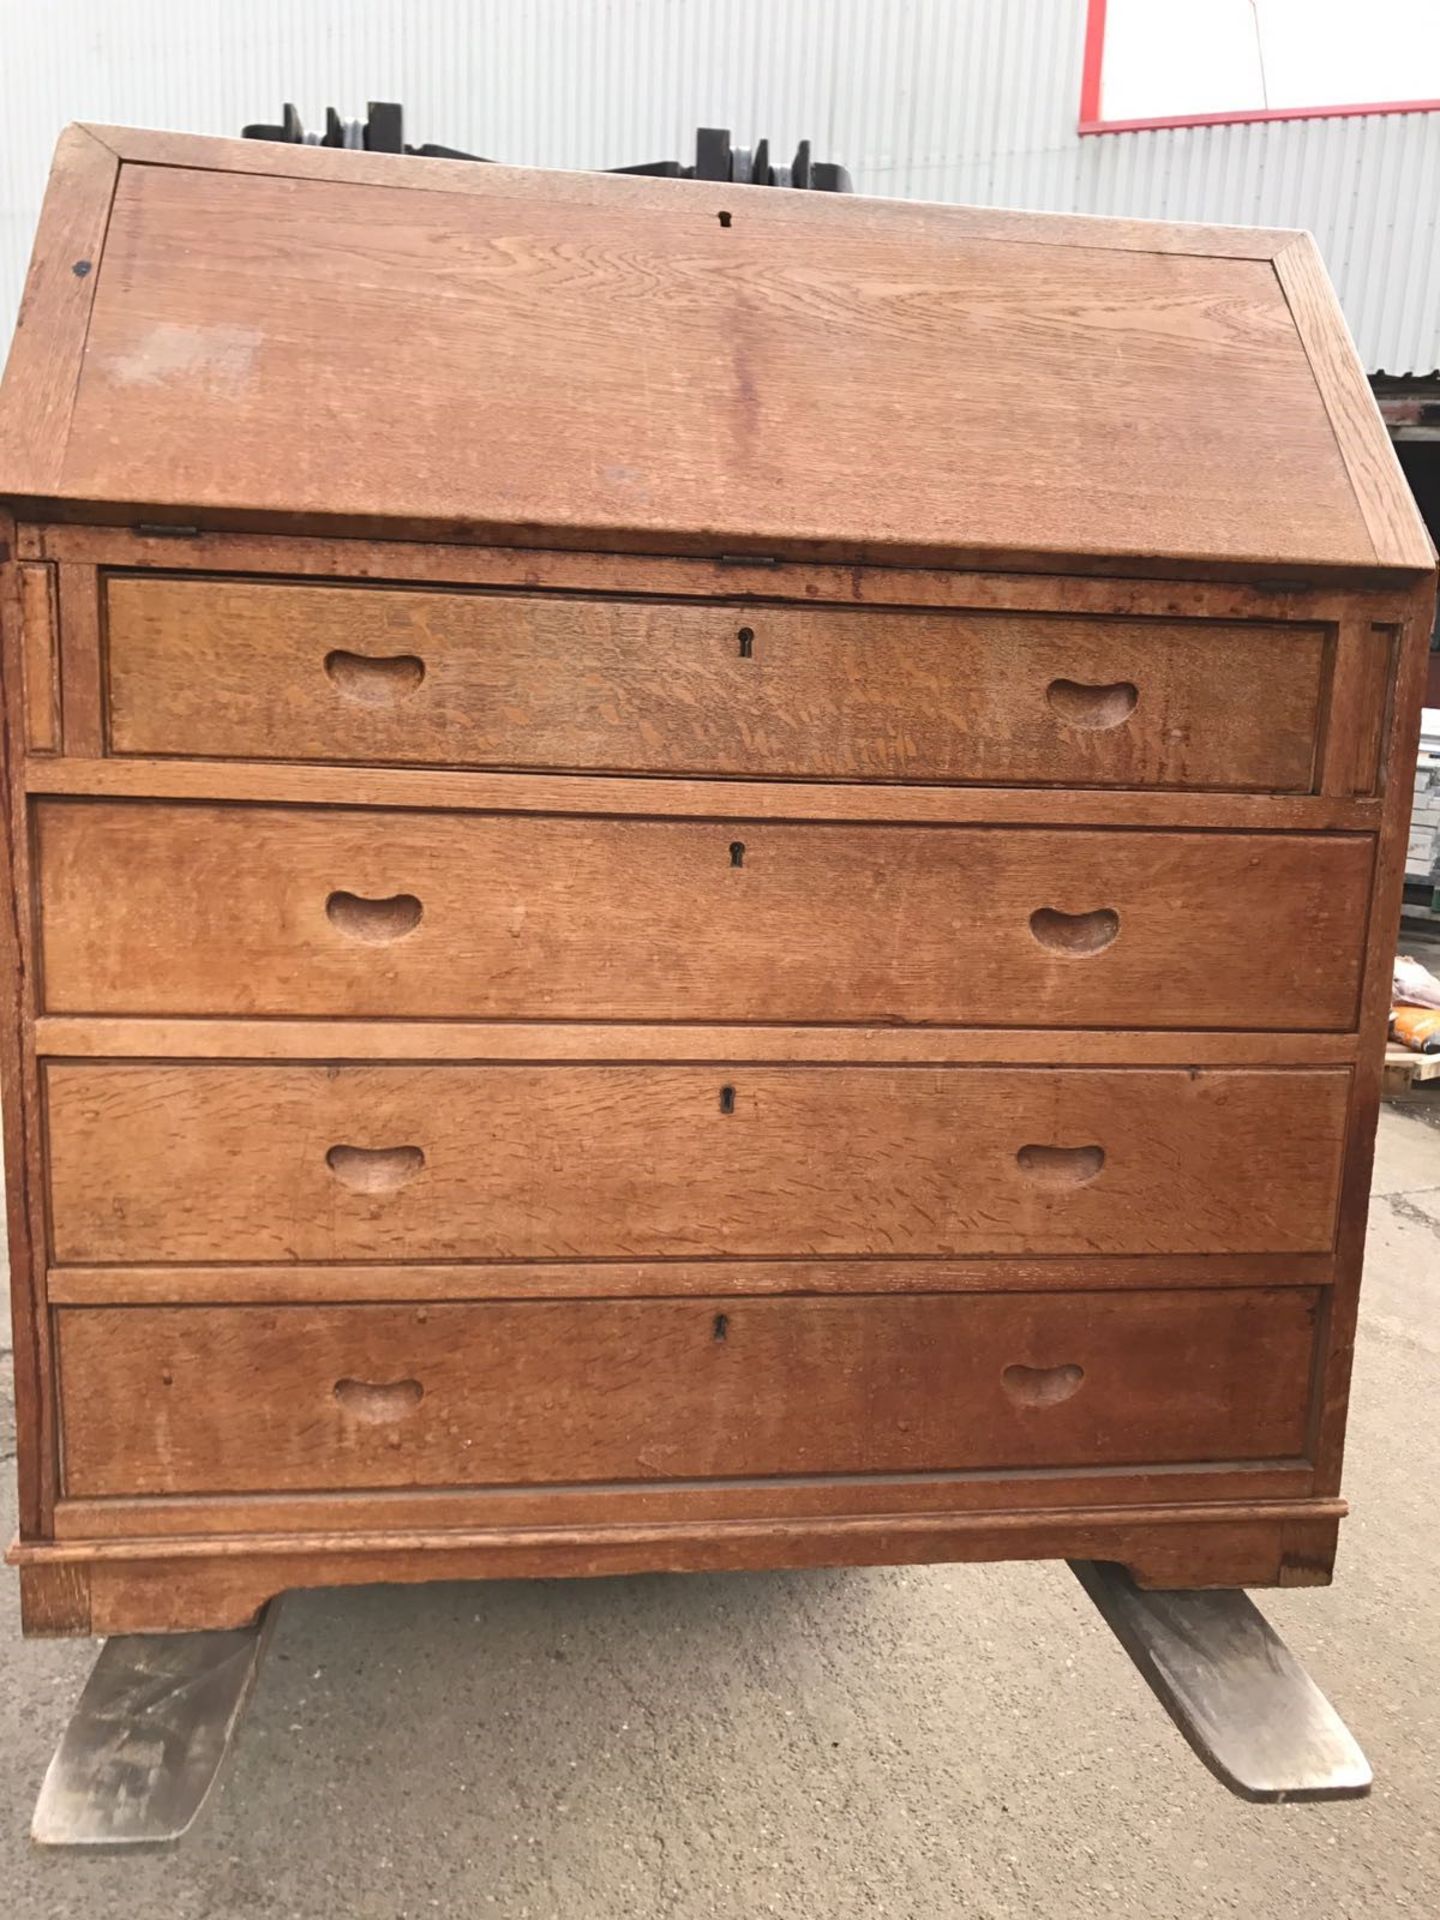 Bureau Chest Of Drawers With Pull Down Desk Top